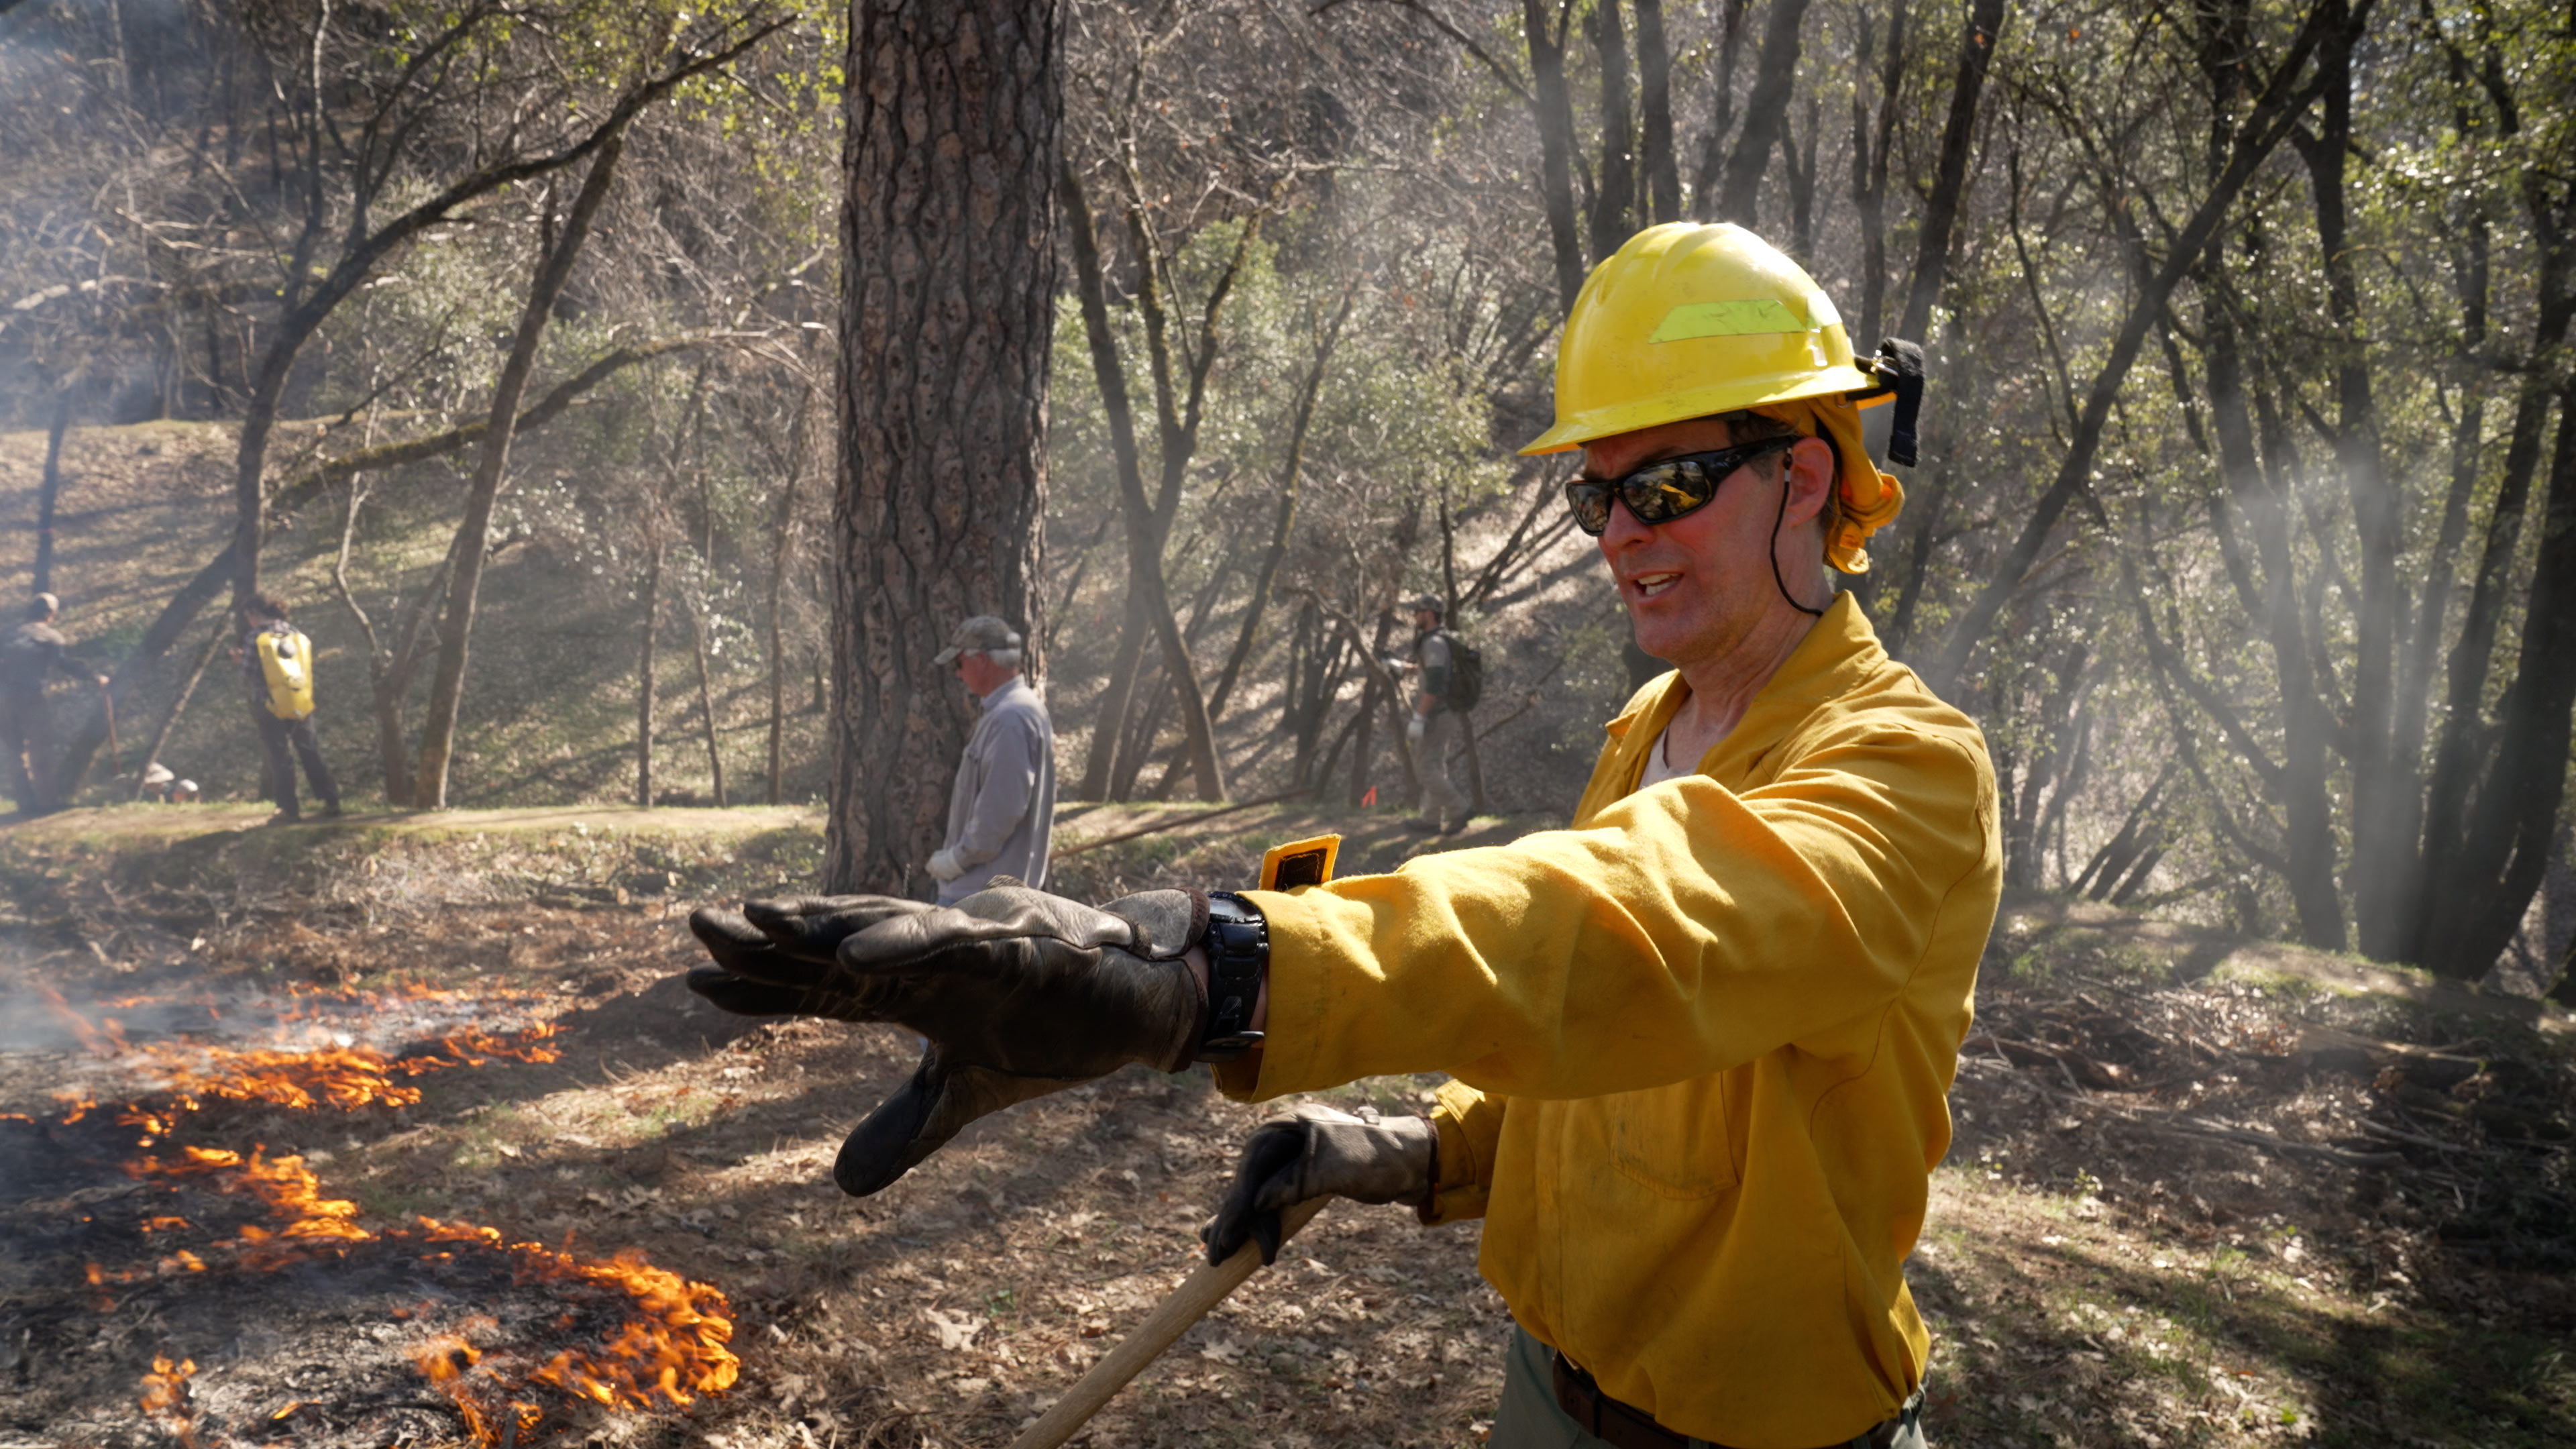 Male forester in yellow hard hat and yellow shirt with hand held in front of him, speaking, during prescribed burn